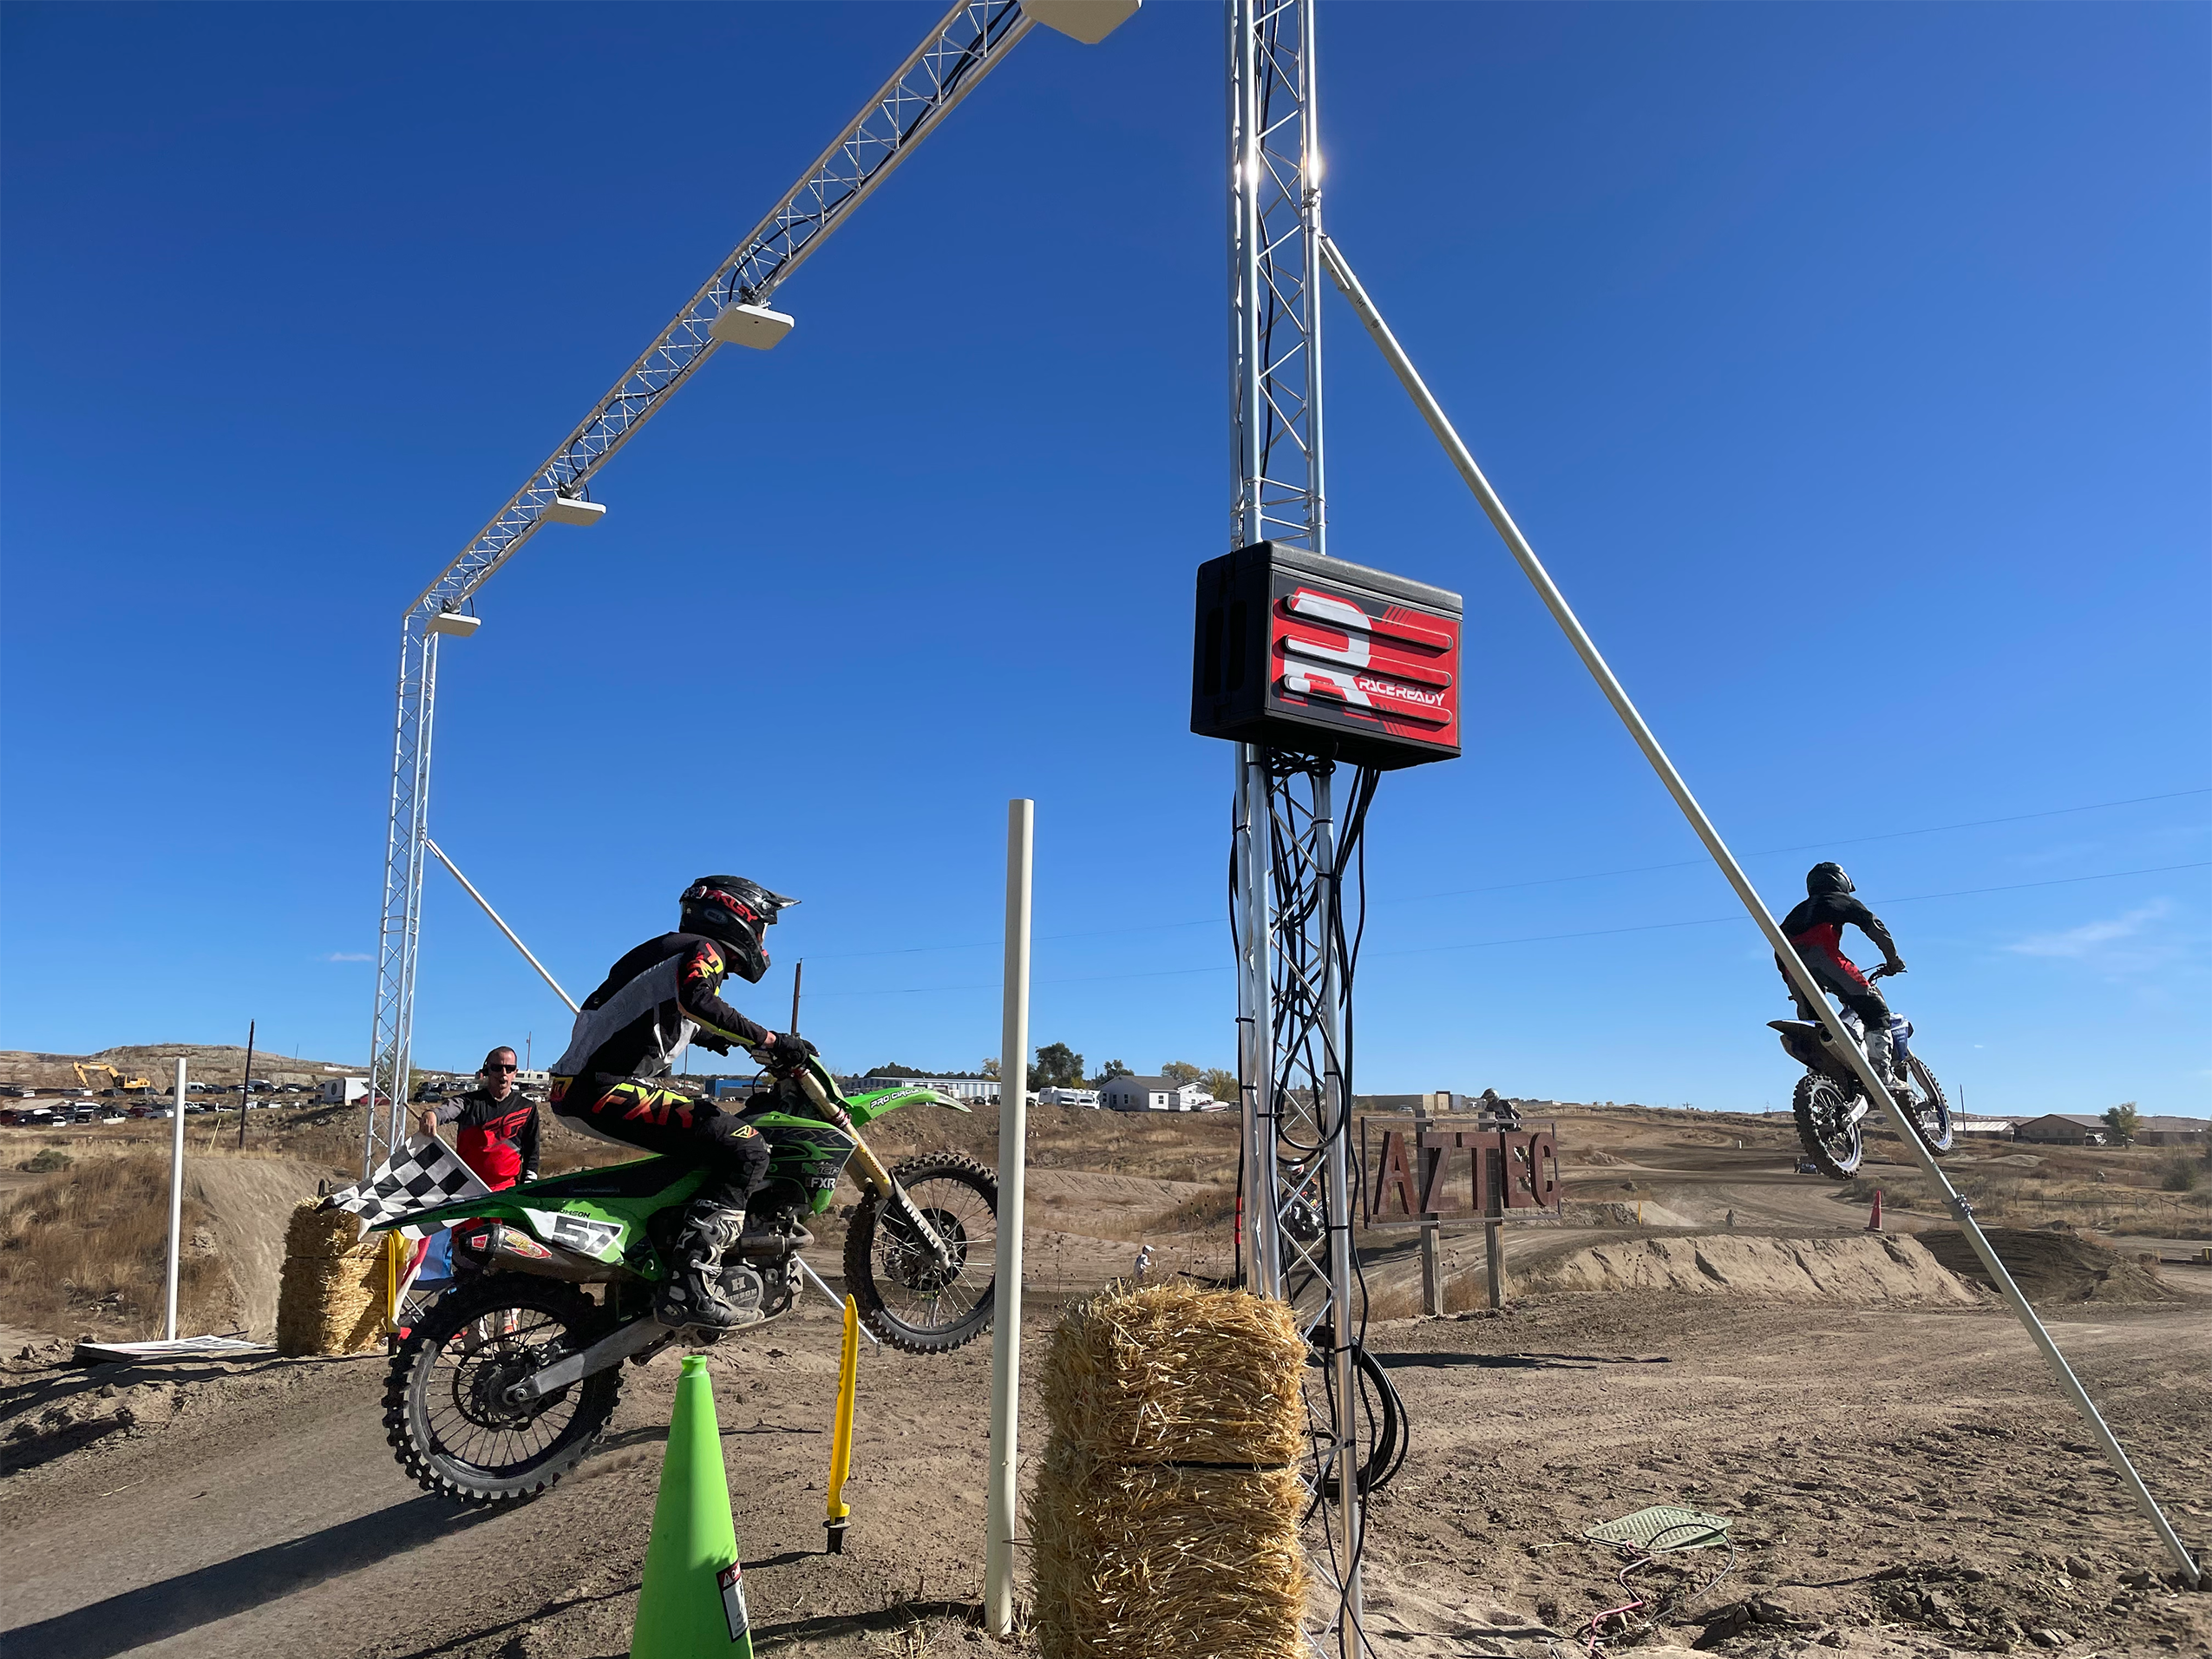 RaceReady Live Timing and Race Management for Motocross Racing